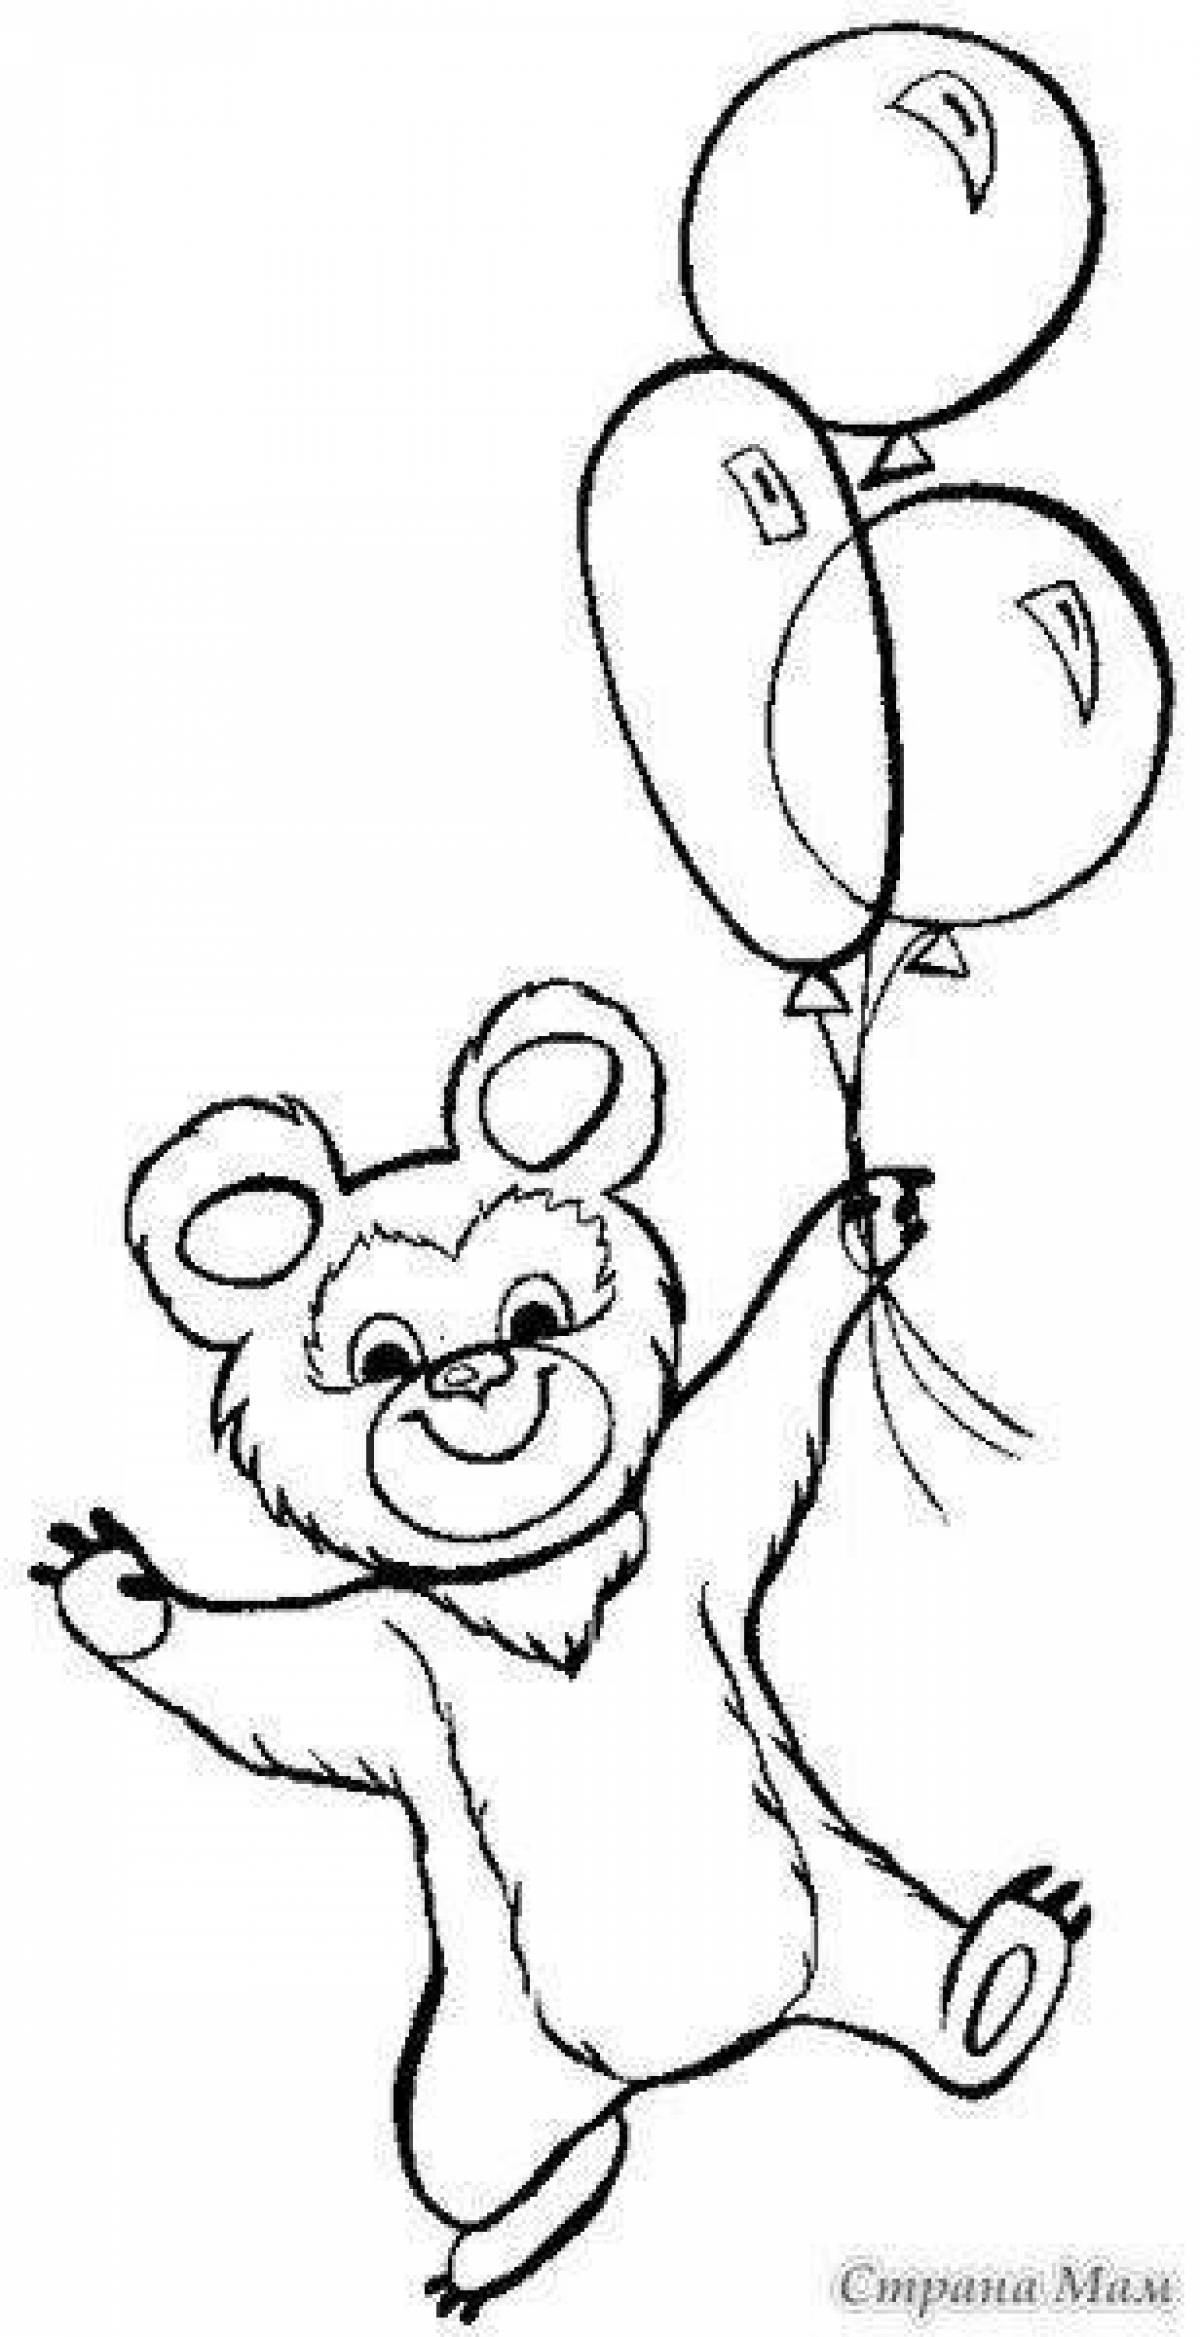 Shiny olympic bear coloring page